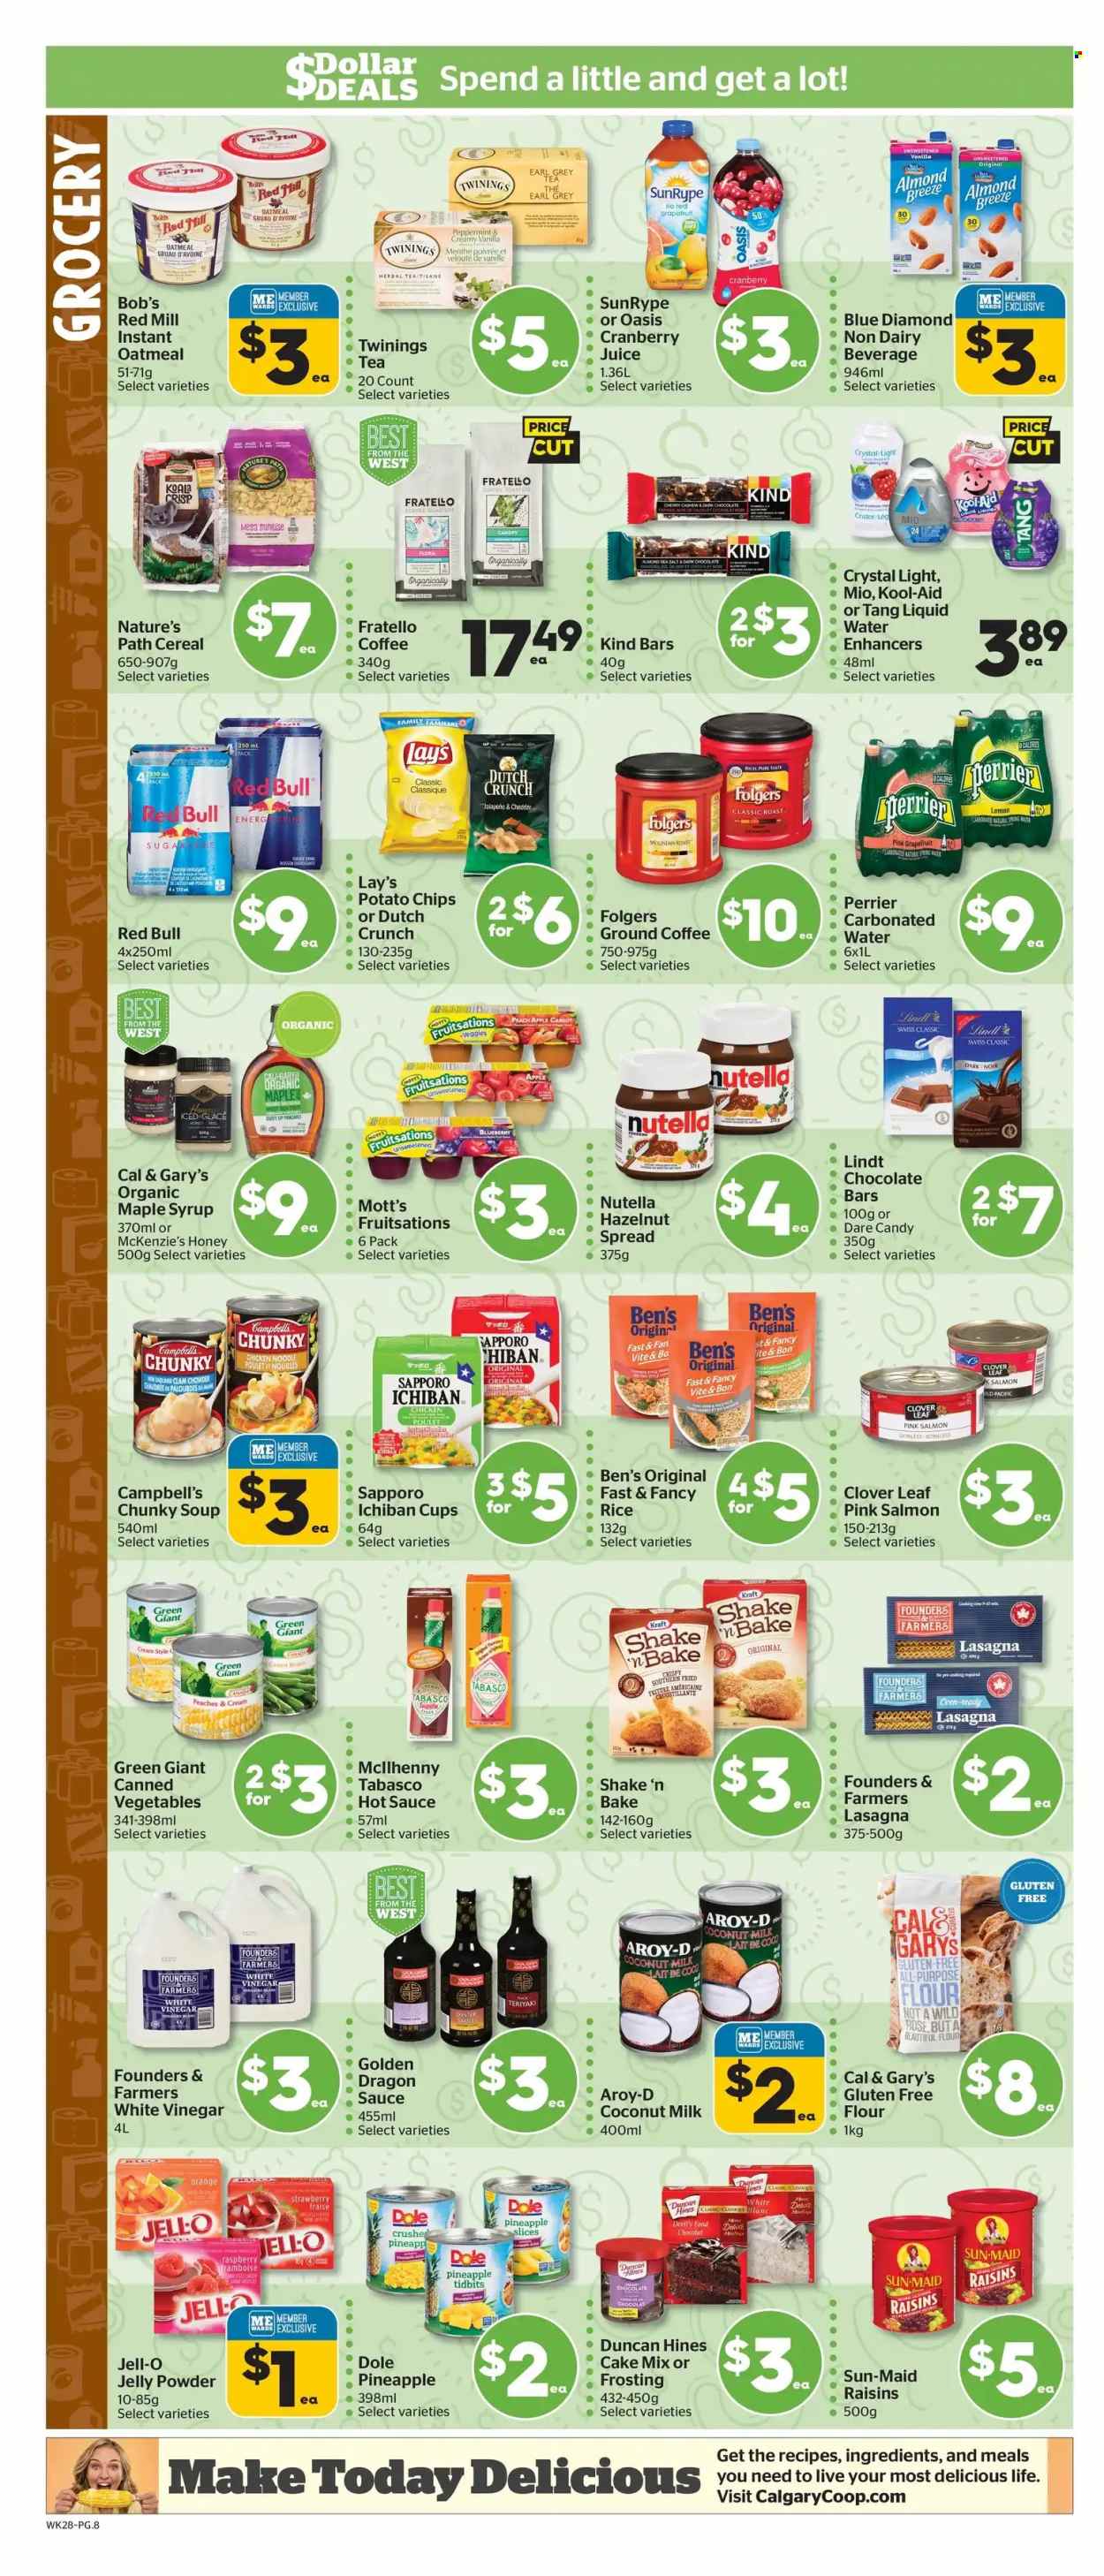 thumbnail - Calgary Co-op Flyer - May 12, 2022 - May 18, 2022 - Sales products - cake mix, Dole, jalapeño, pineapple, peaches, Mott's, salmon, oysters, Campbell's, soup, noodles, lasagna meal, Kraft®, cheese, Clover, Almond Breeze, shake, chocolate, jelly, dark chocolate, potato chips, chips, Lay’s, flour, frosting, sugar, tabasco, oatmeal, Jell-O, coconut milk, clam chowder, cereals, hot sauce, Dragon Sauce, maple syrup, honey, syrup, dried fruit, Blue Diamond, cranberry juice, juice, Red Bull, Perrier, tea, herbal tea, Twinings, coffee, Folgers, ground coffee, raisins, Nutella, Lindt, oranges. Page 10.